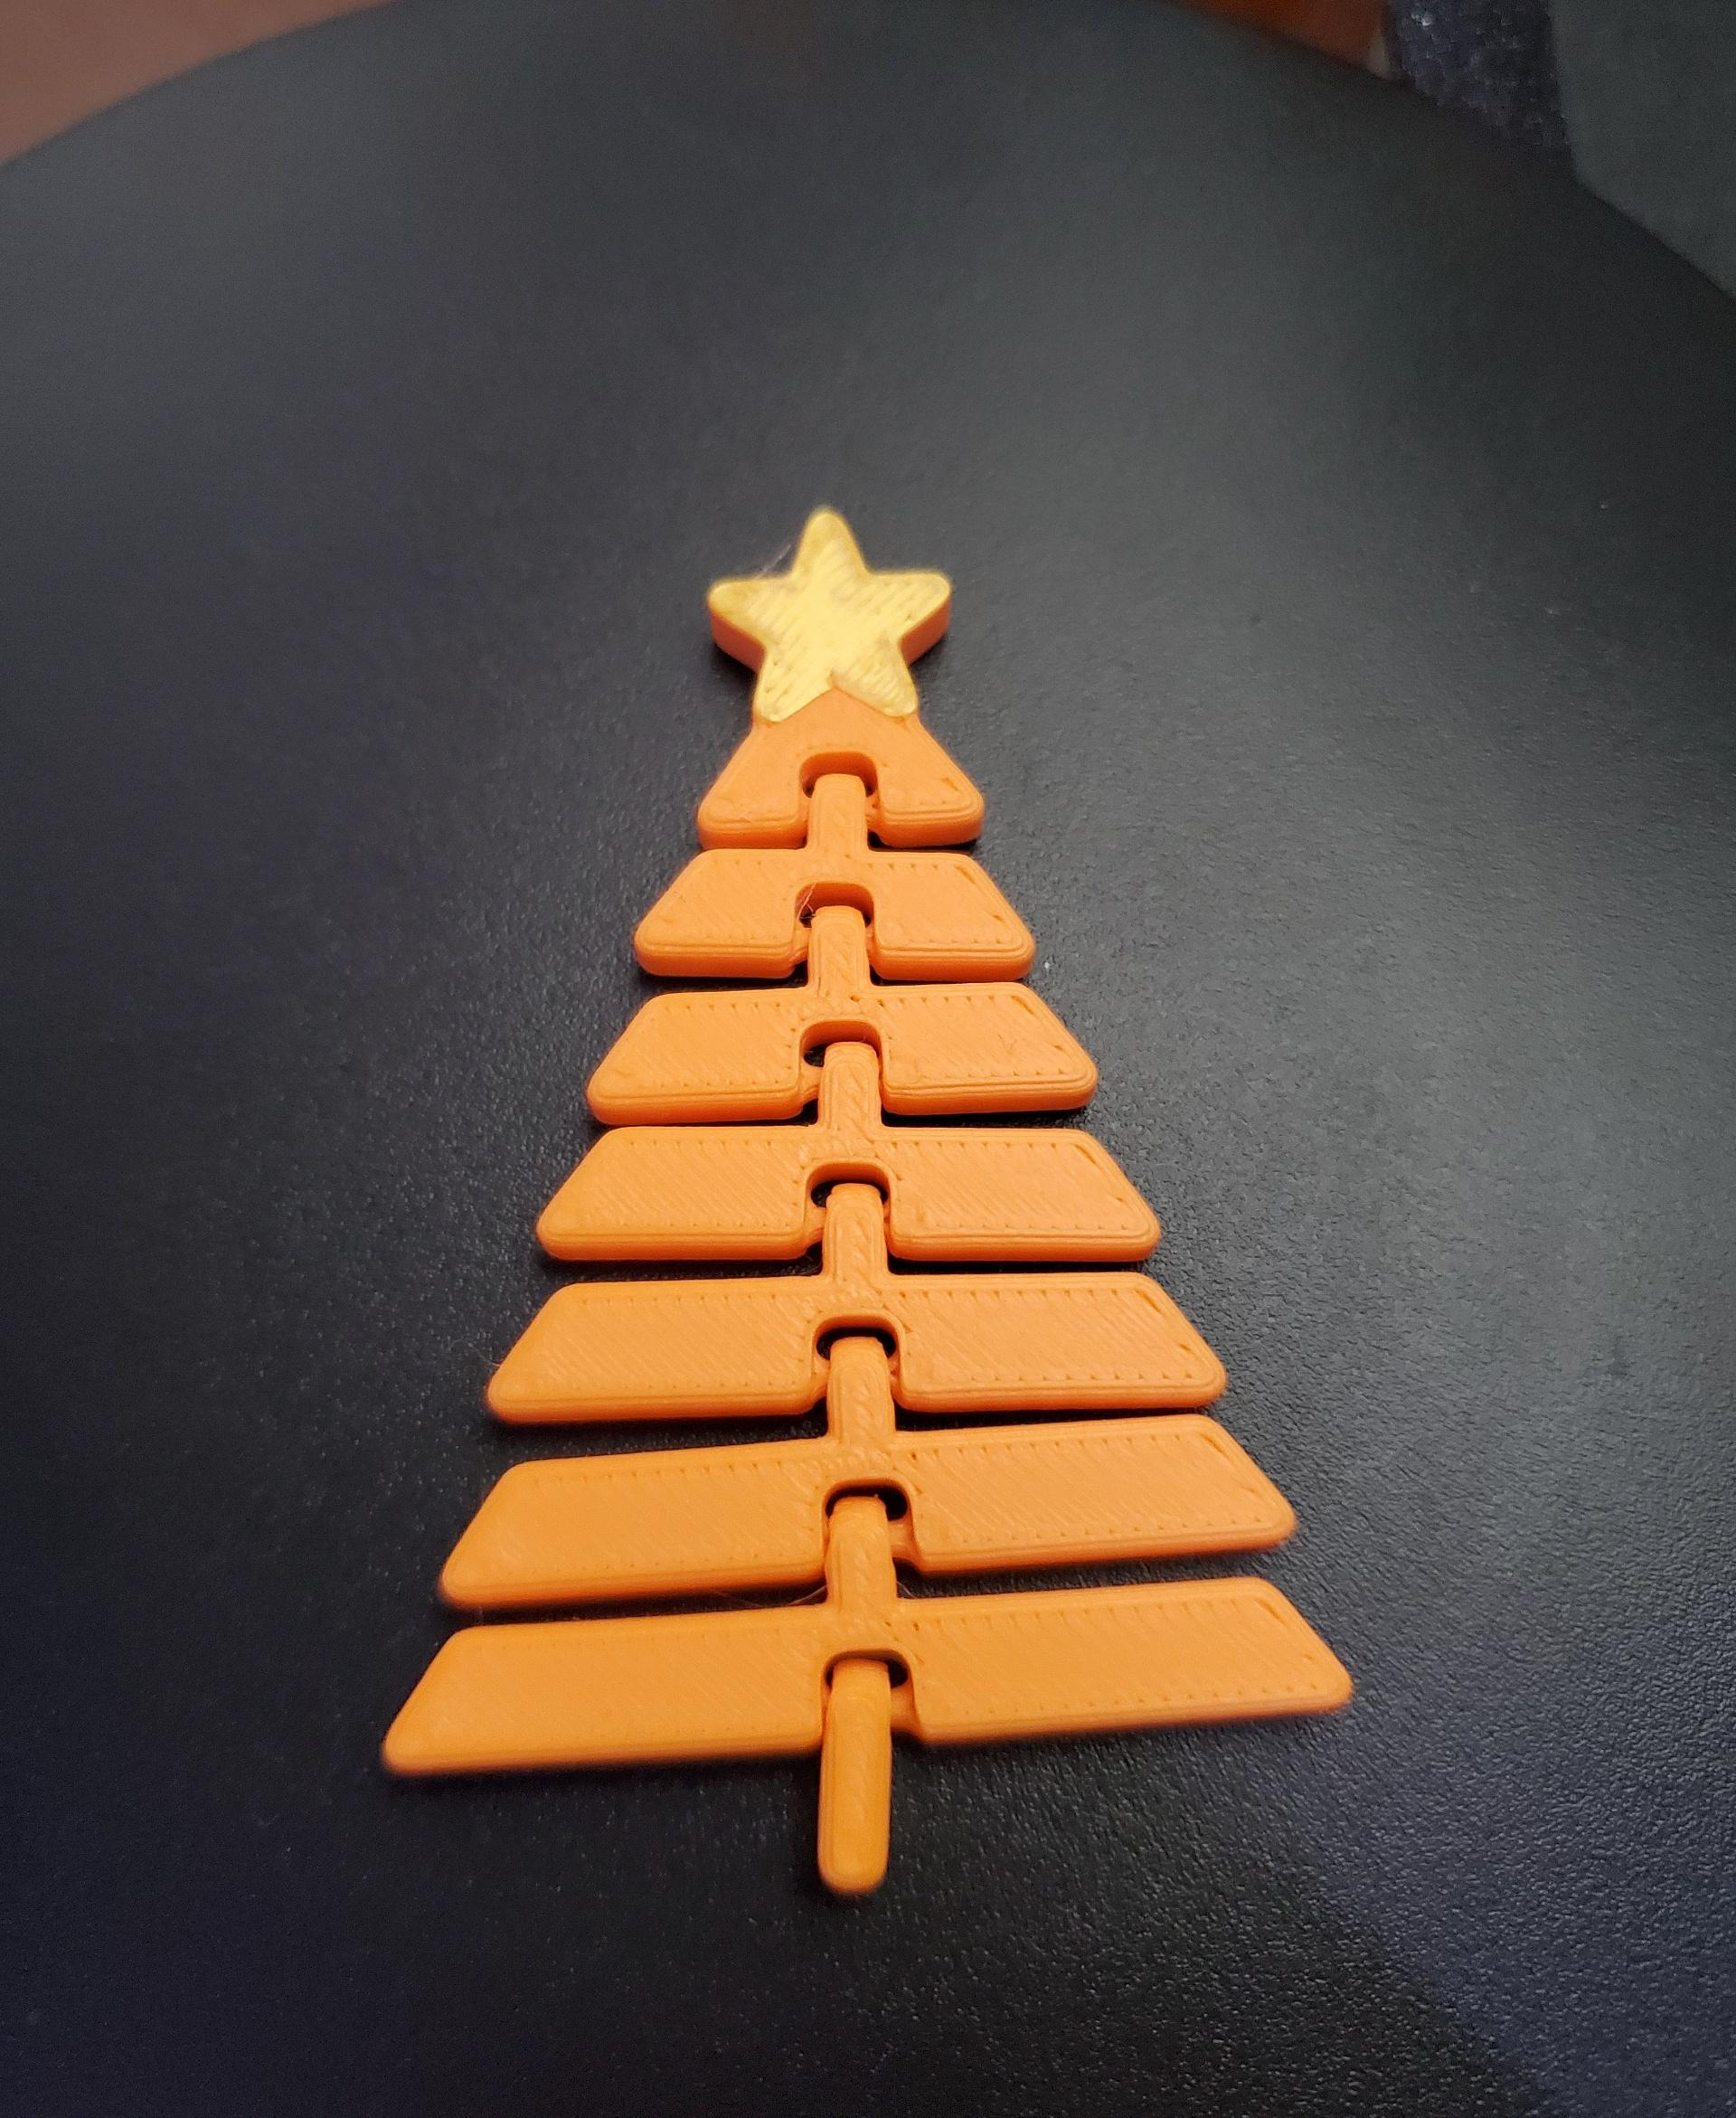 Articulated Christmas Tree with Star - Print in place fidget toy - 3mf - polyterra sunrise orange - 3d model